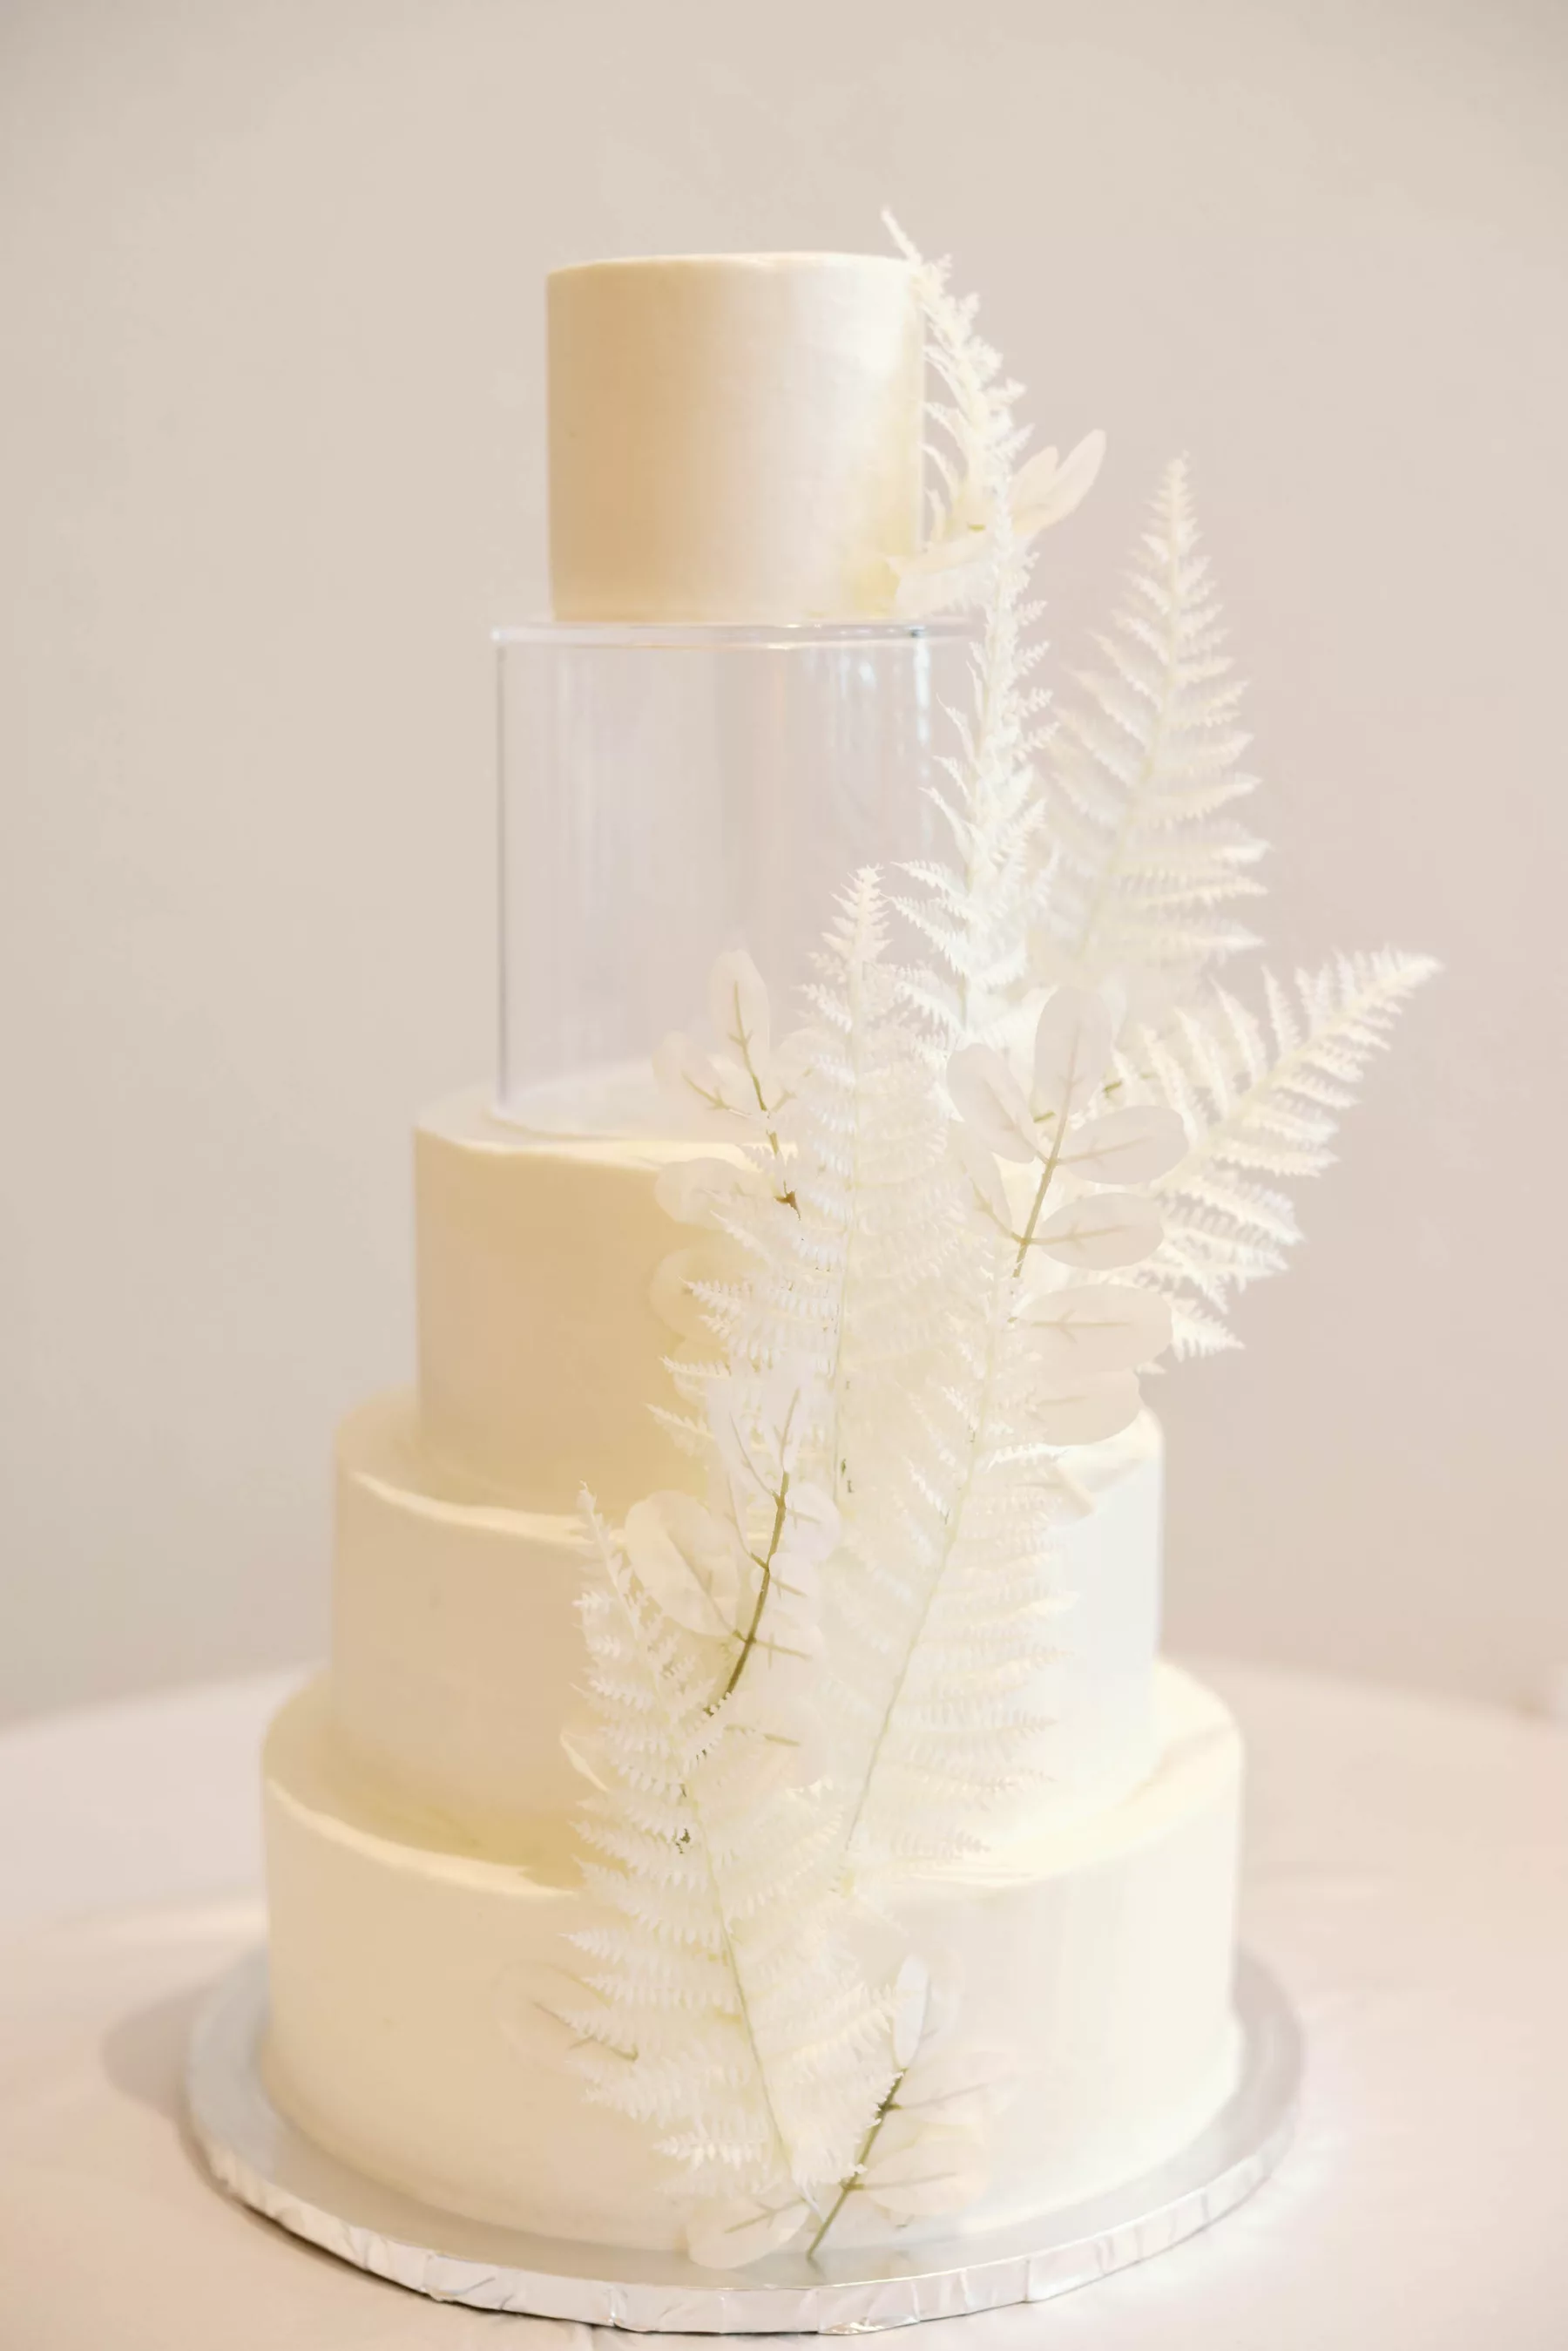 White Round Buttercream 5-Tiered Wedding Cake Inspiration with Acrylic Tier and White Fern Accent